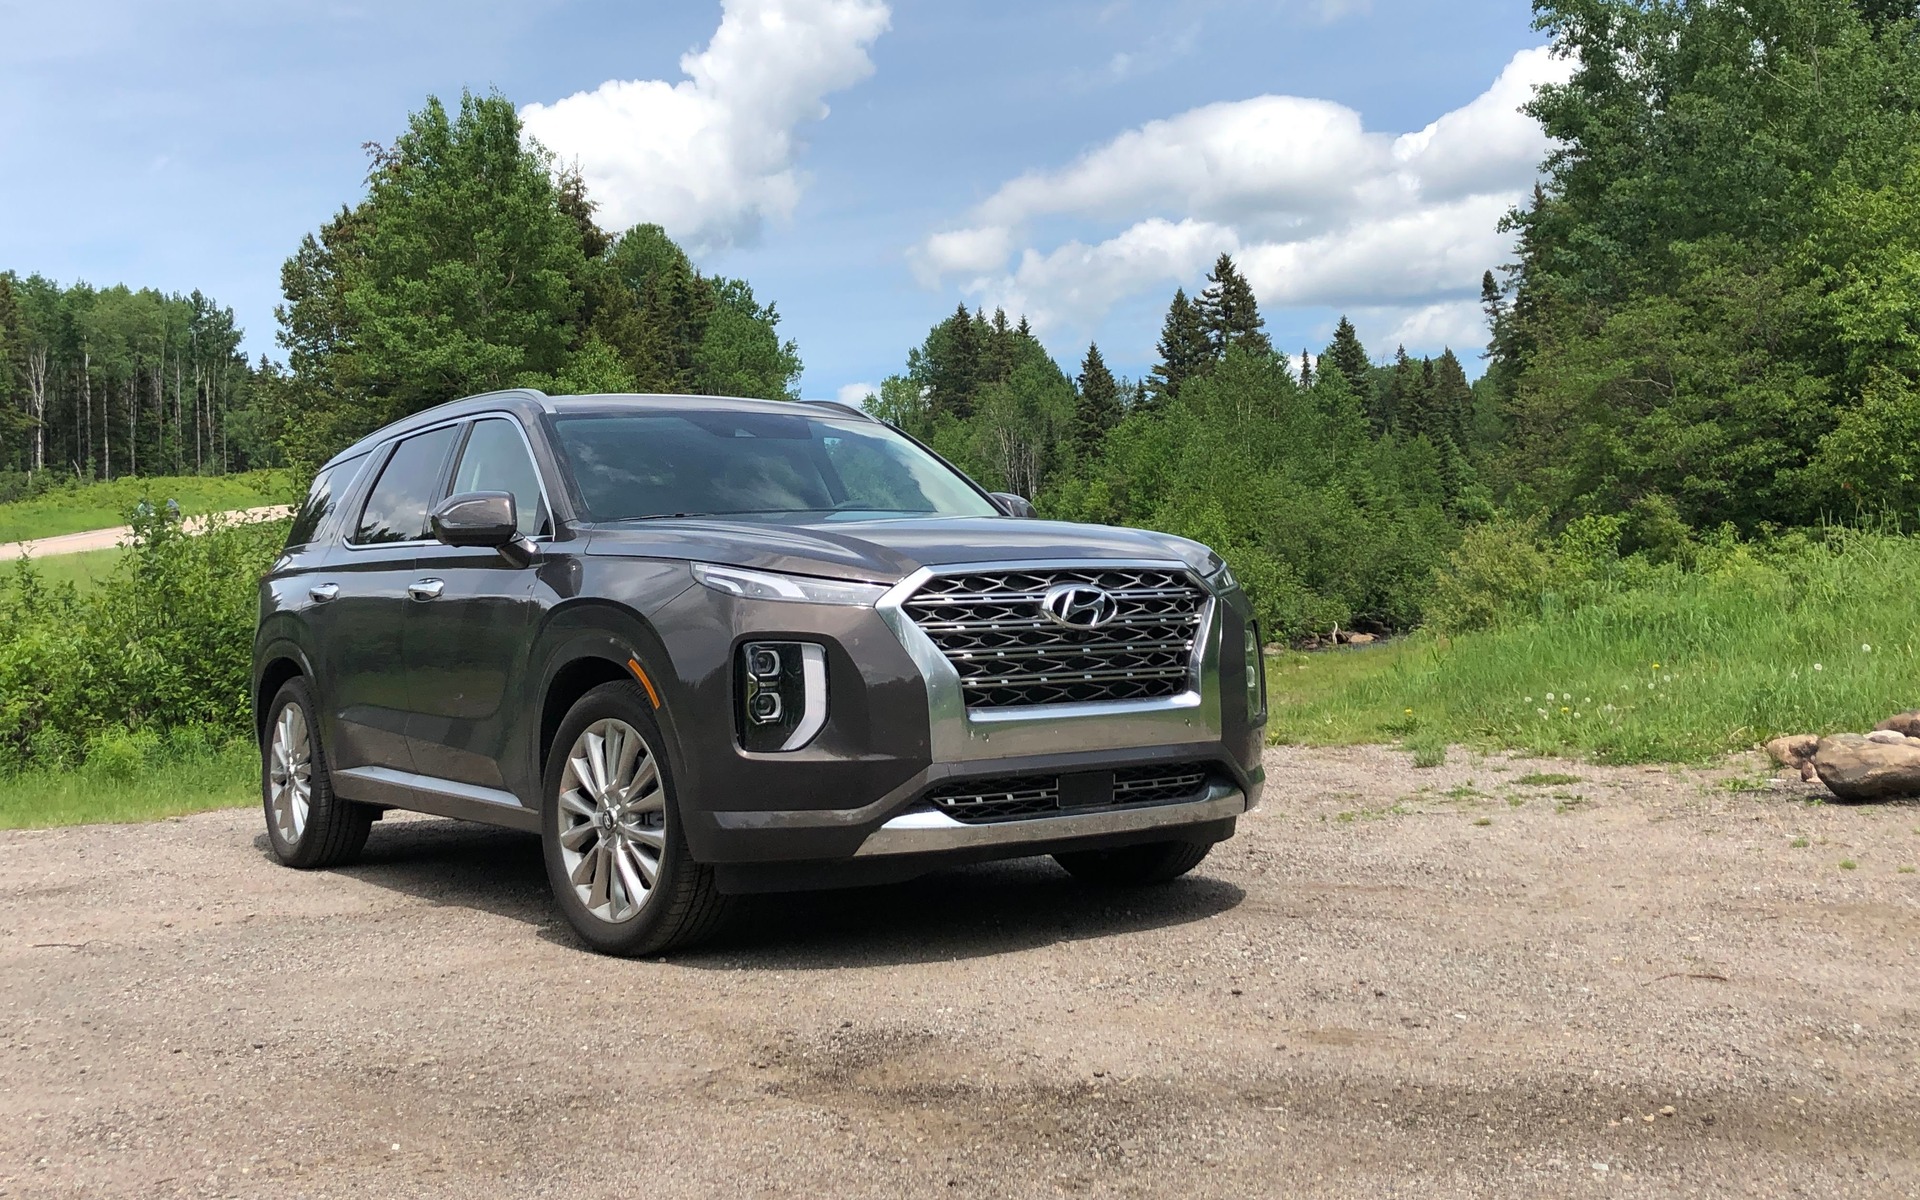 2020 Hyundai Palisade: This New SUV Means Business - The Car Guide